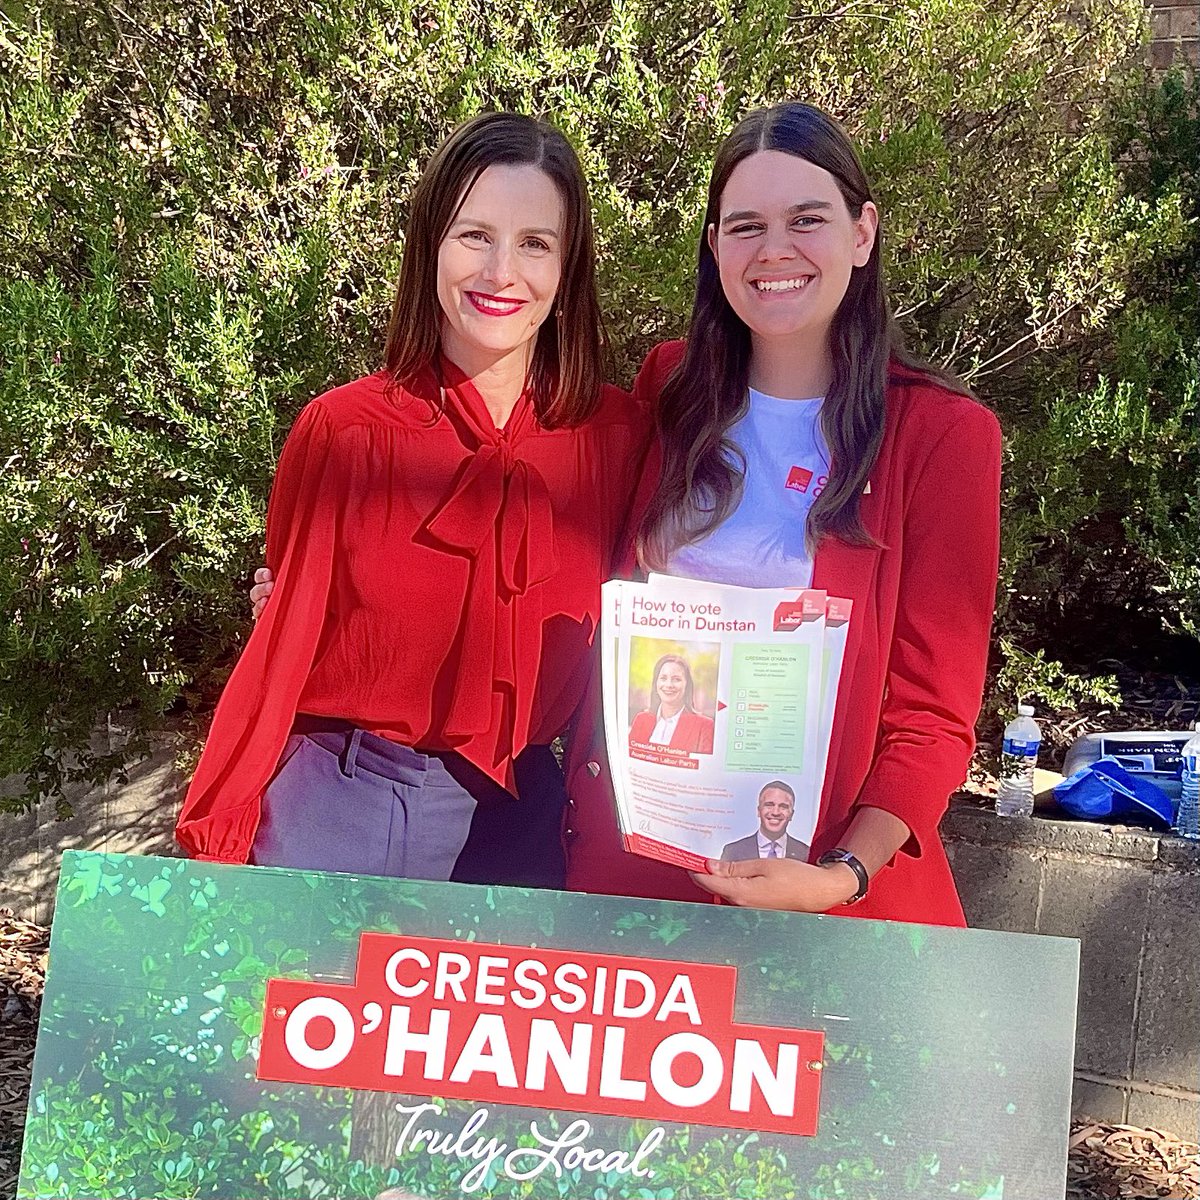 Earlier today, ECSA officially declared Cressida O’Hanlon as the new Member of Parliament for Dunstan!

It’s been an absolute joy campaigning for Cressida over the last 3 years, and joining her on the campaign trail over recent months.